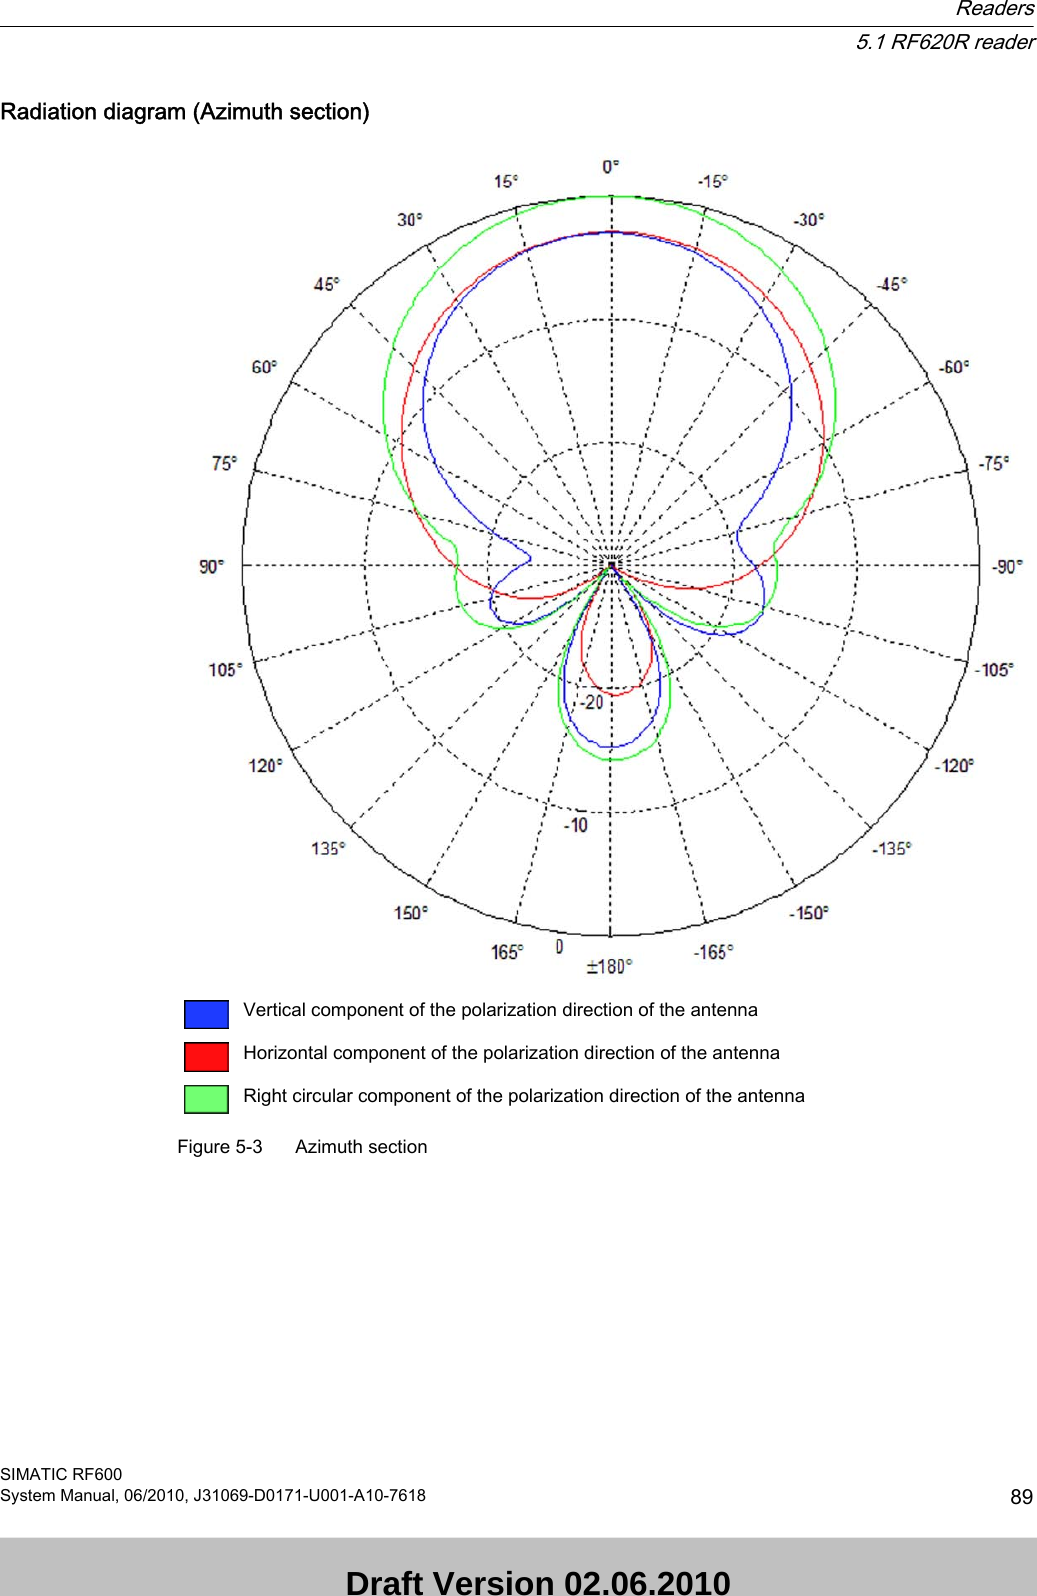 Radiation diagram (Azimuth section)Vertical component of the polarization direction of the antennaHorizontal component of the polarization direction of the antennaRight circular component of the polarization direction of the antennaFigure 5-3 Azimuth sectionReaders5.1 RF620R readerSIMATIC RF600System Manual, 06/2010, J31069-D0171-U001-A10-7618 89 Draft Version 02.06.2010 